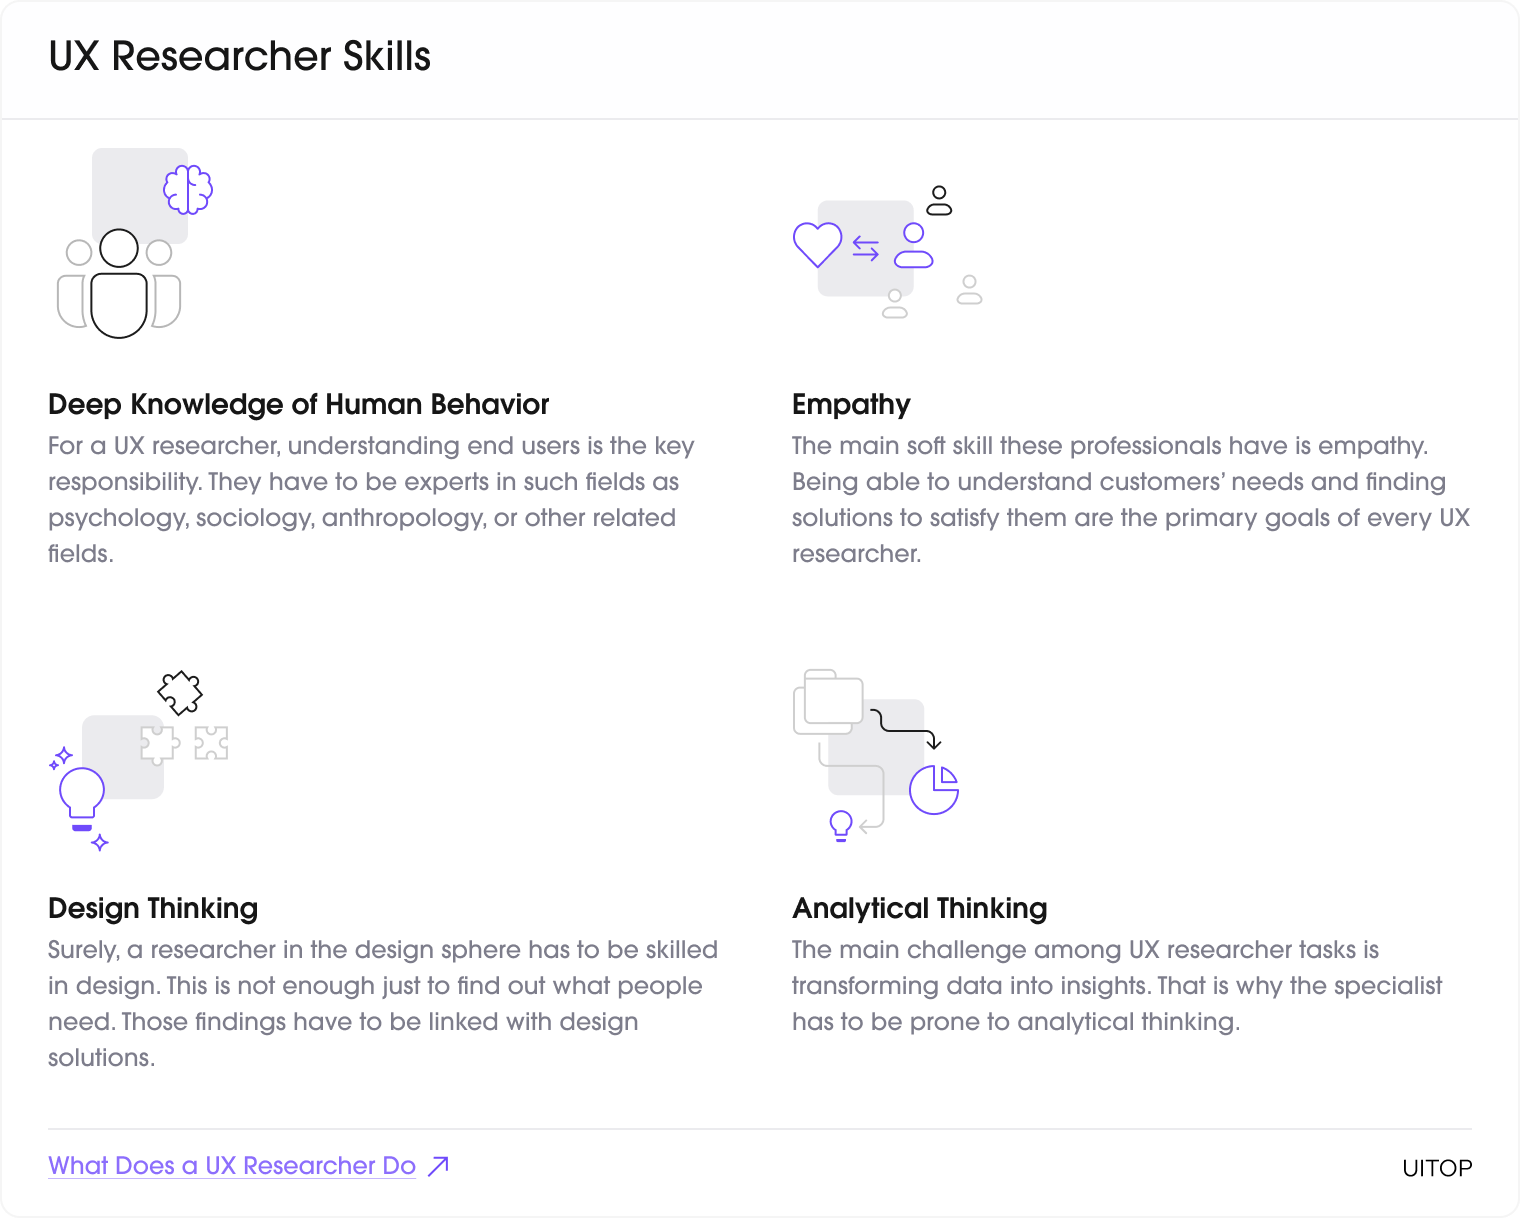 skills needed for UX researcher